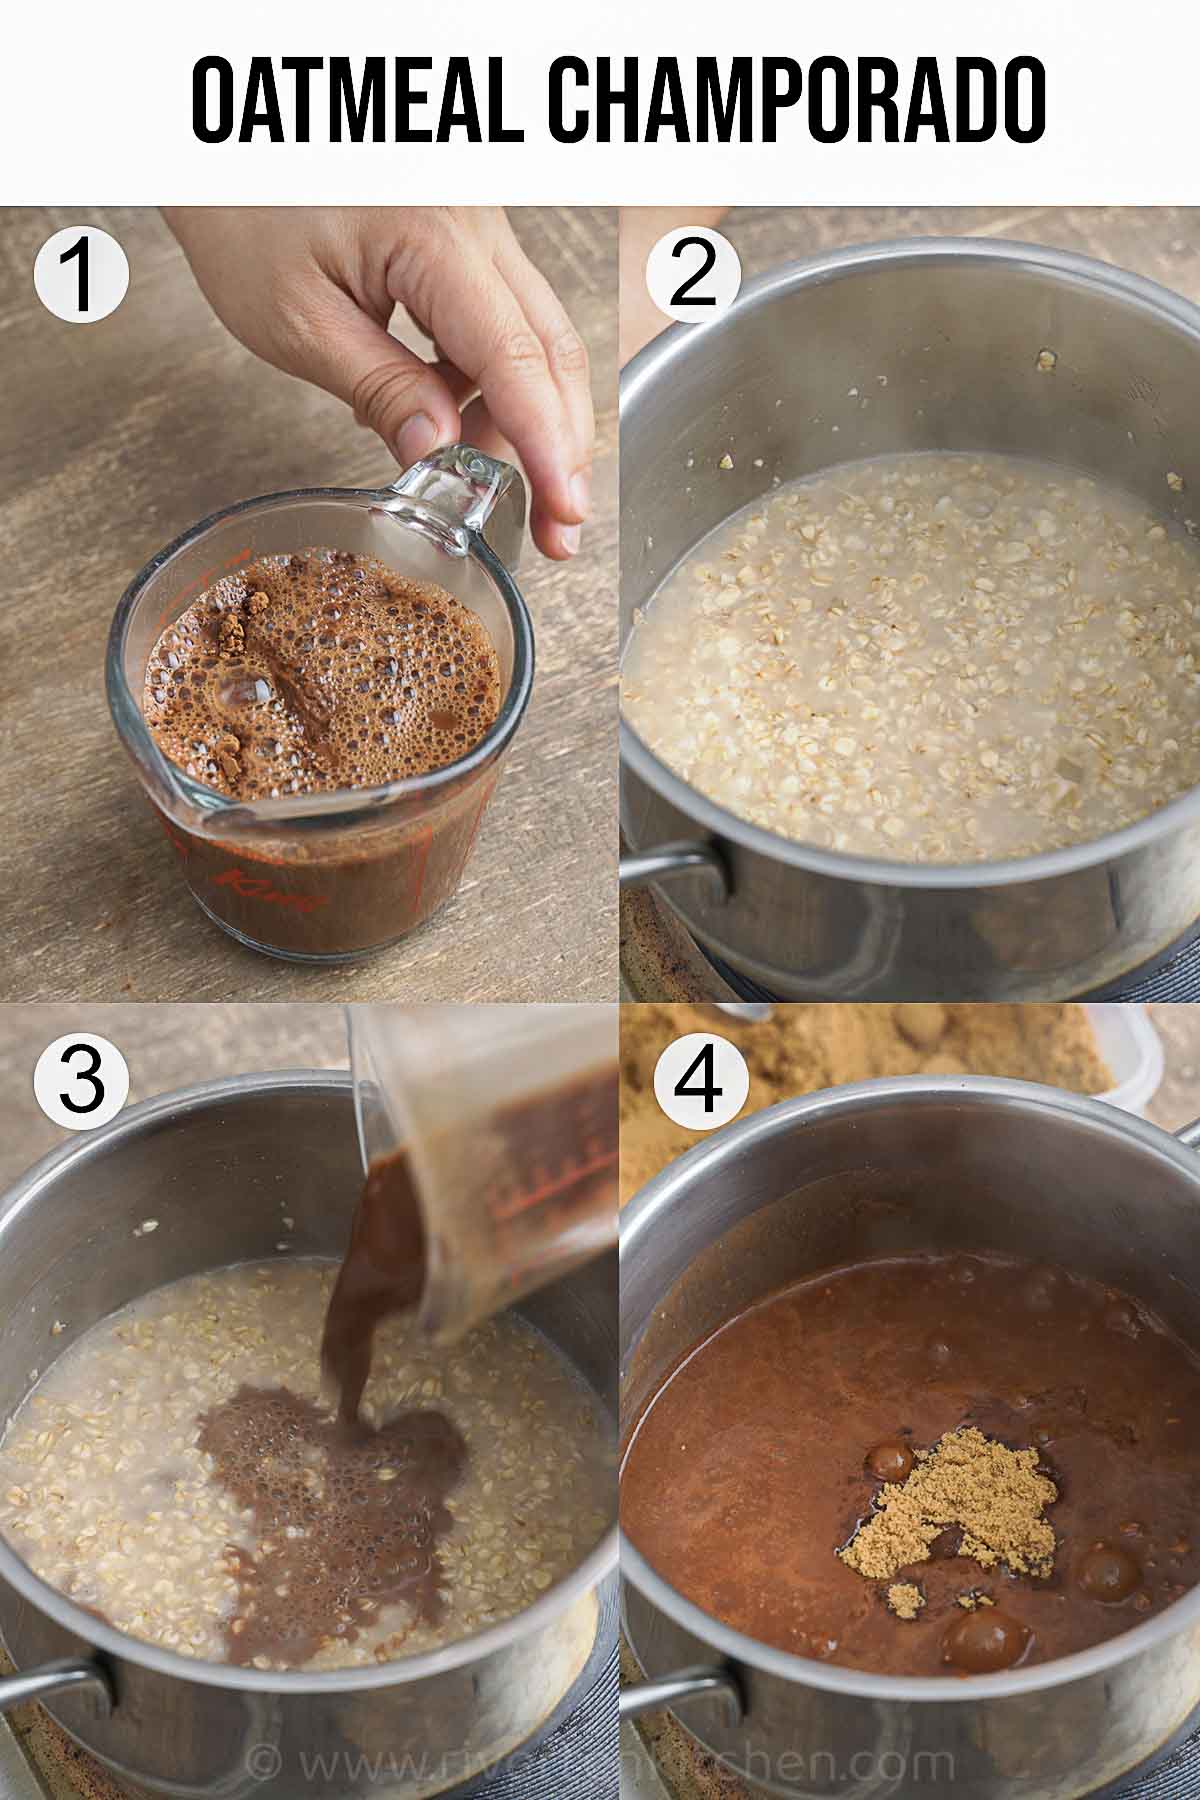 step-by-step photos on how to make Filipino champorado with Oatmeal.